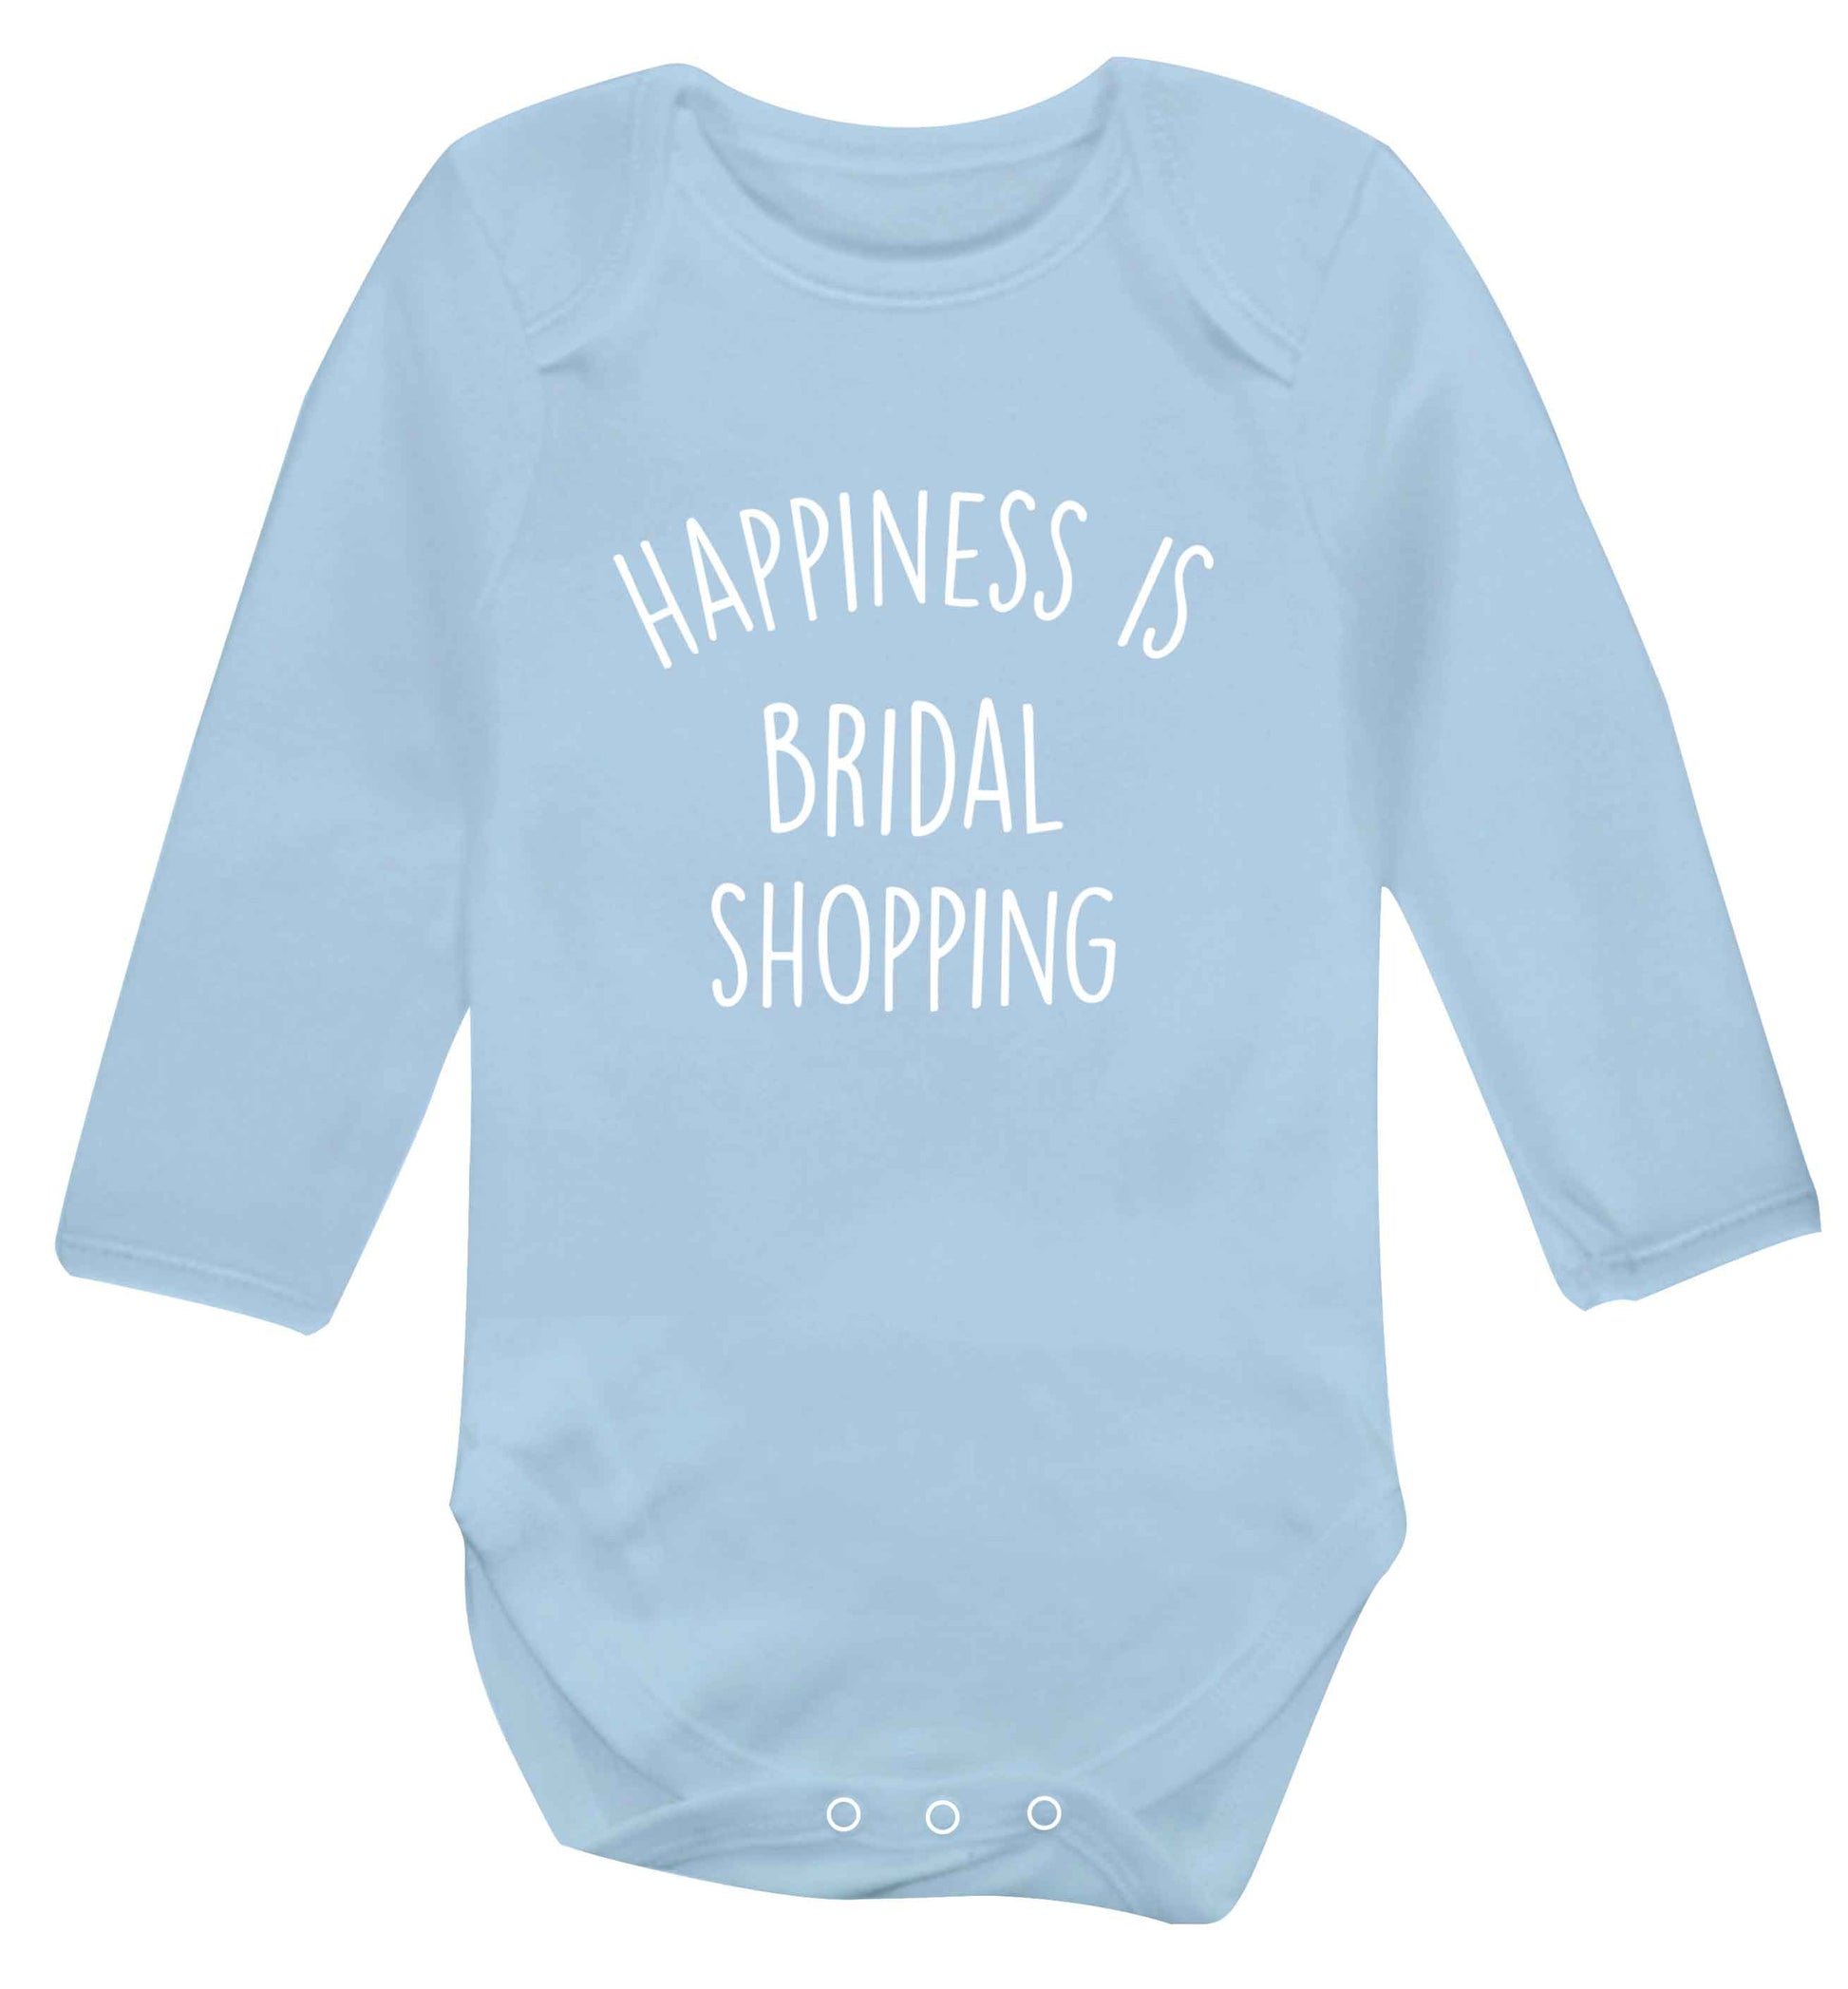 Happiness is bridal shopping baby vest long sleeved pale blue 6-12 months